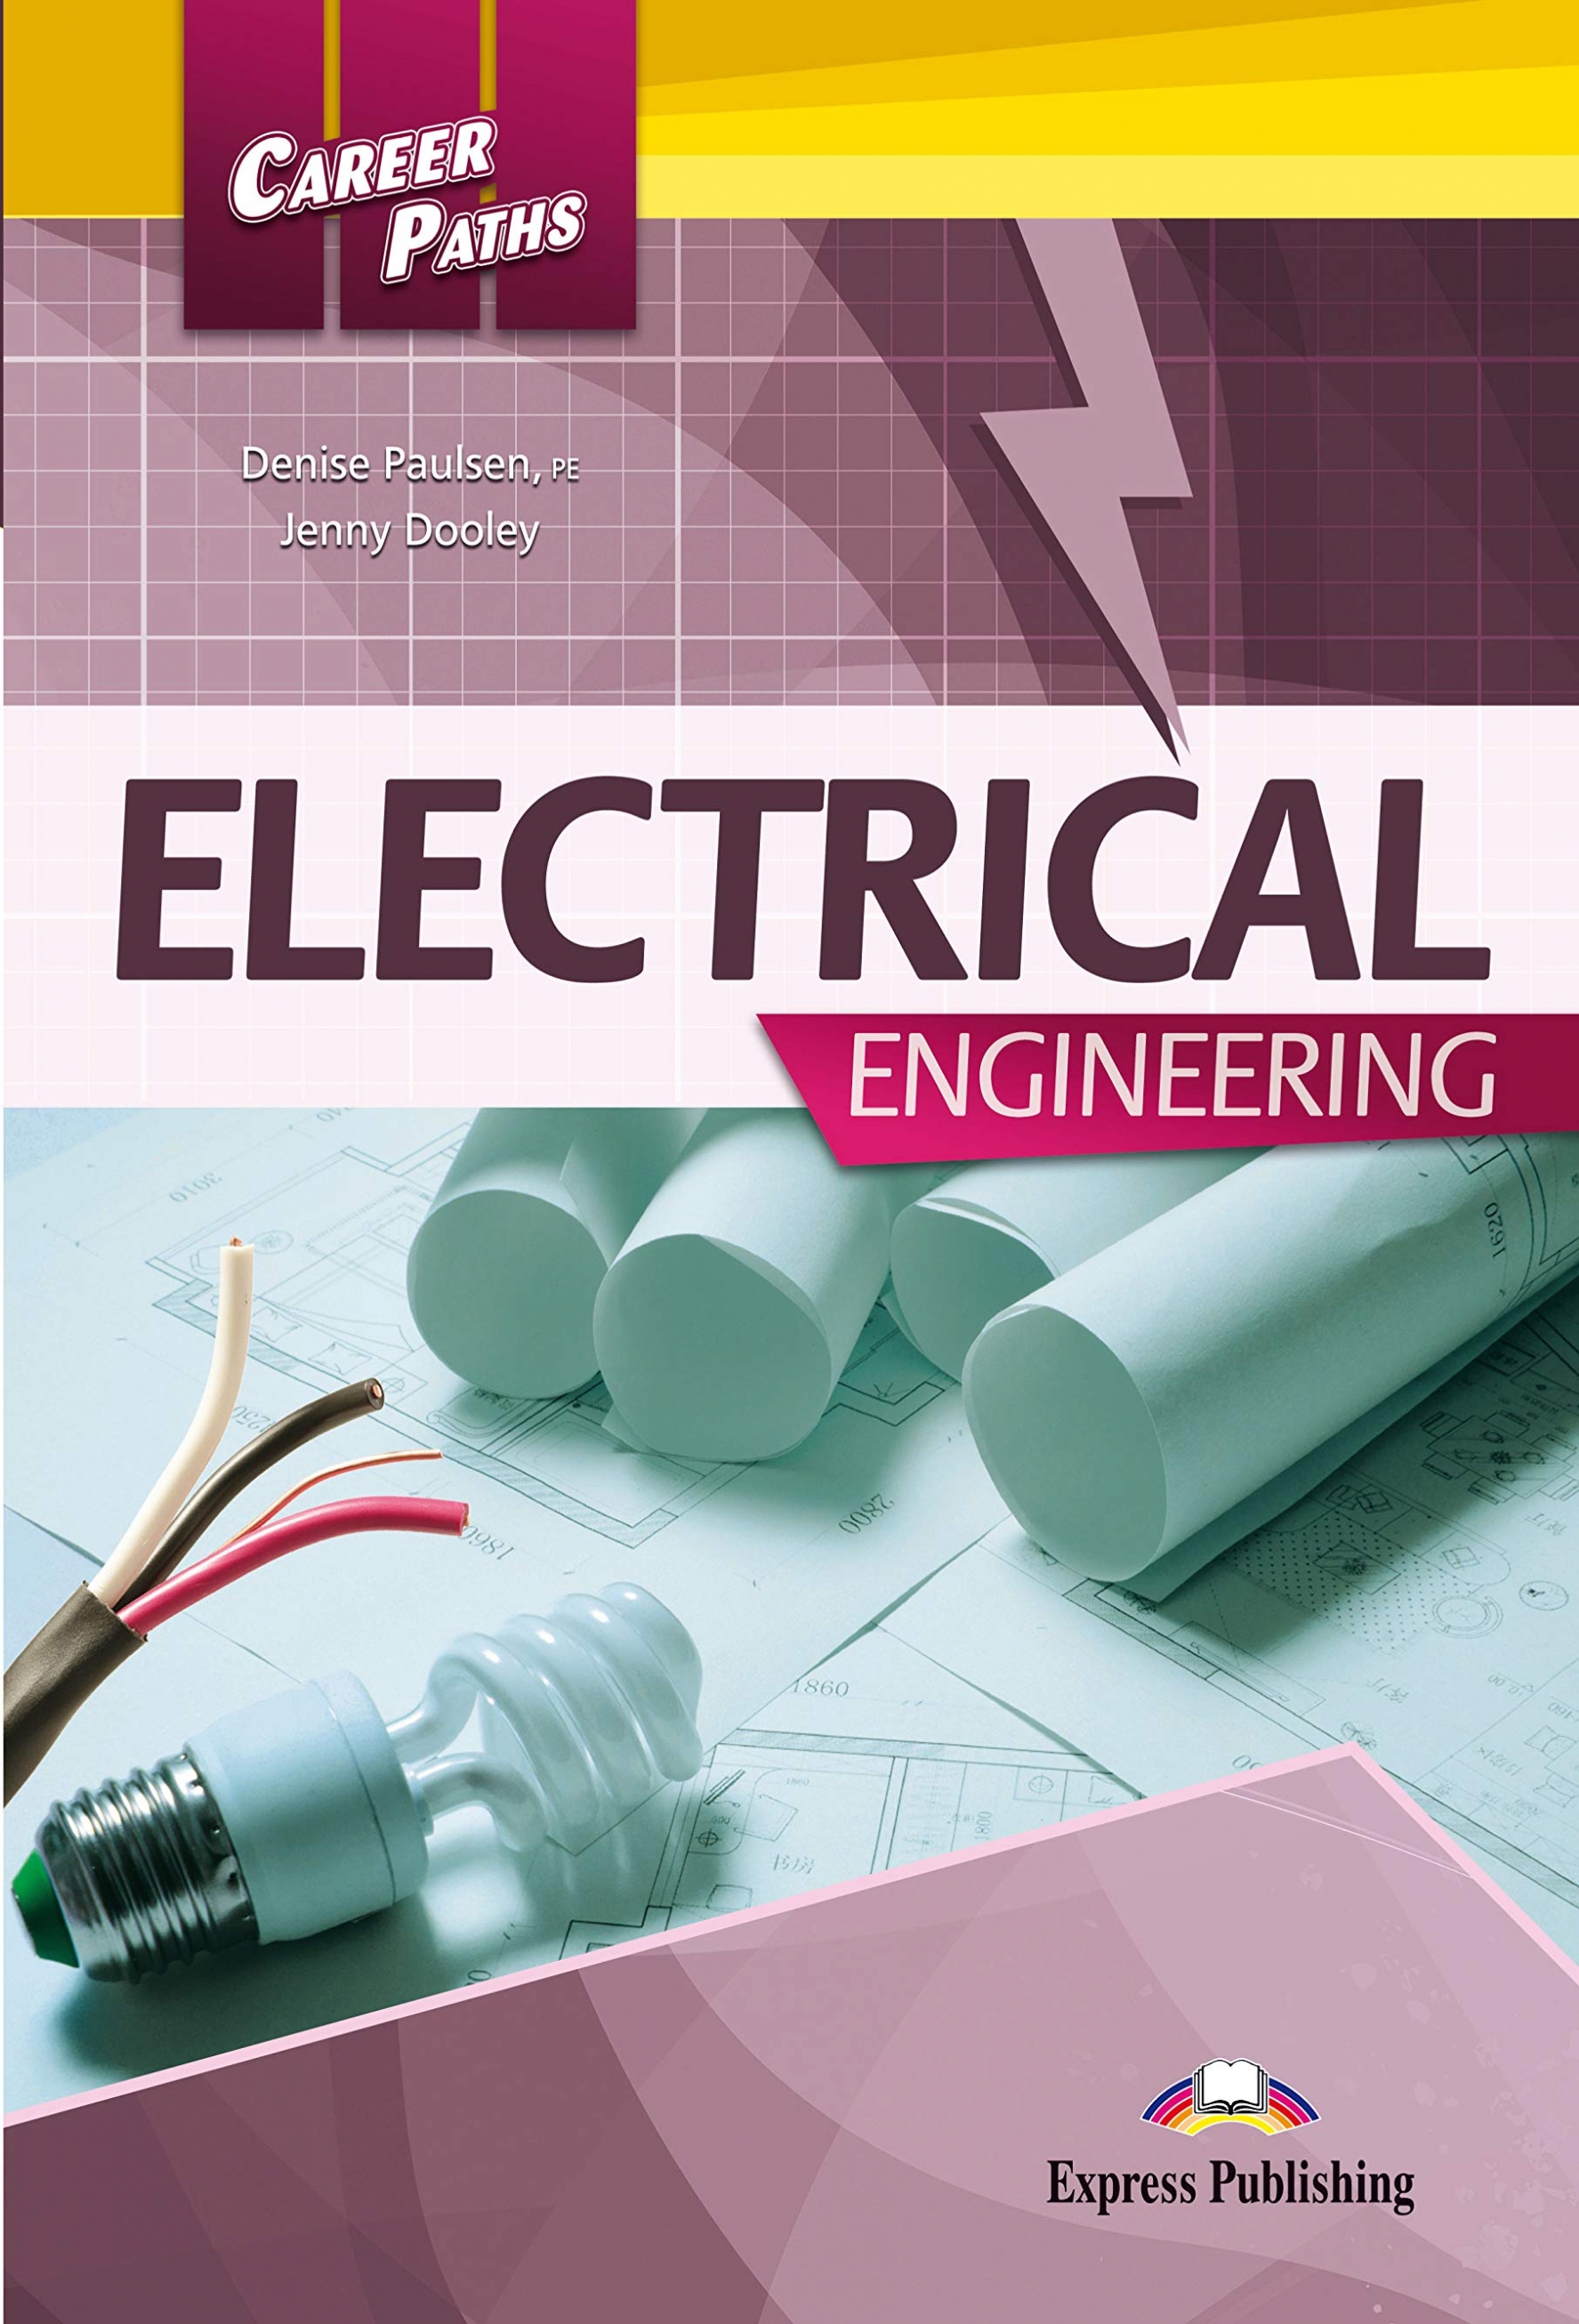 ELECTRICAL ENGINEERING (CAREER PATHS) Student's Book with digibook app.